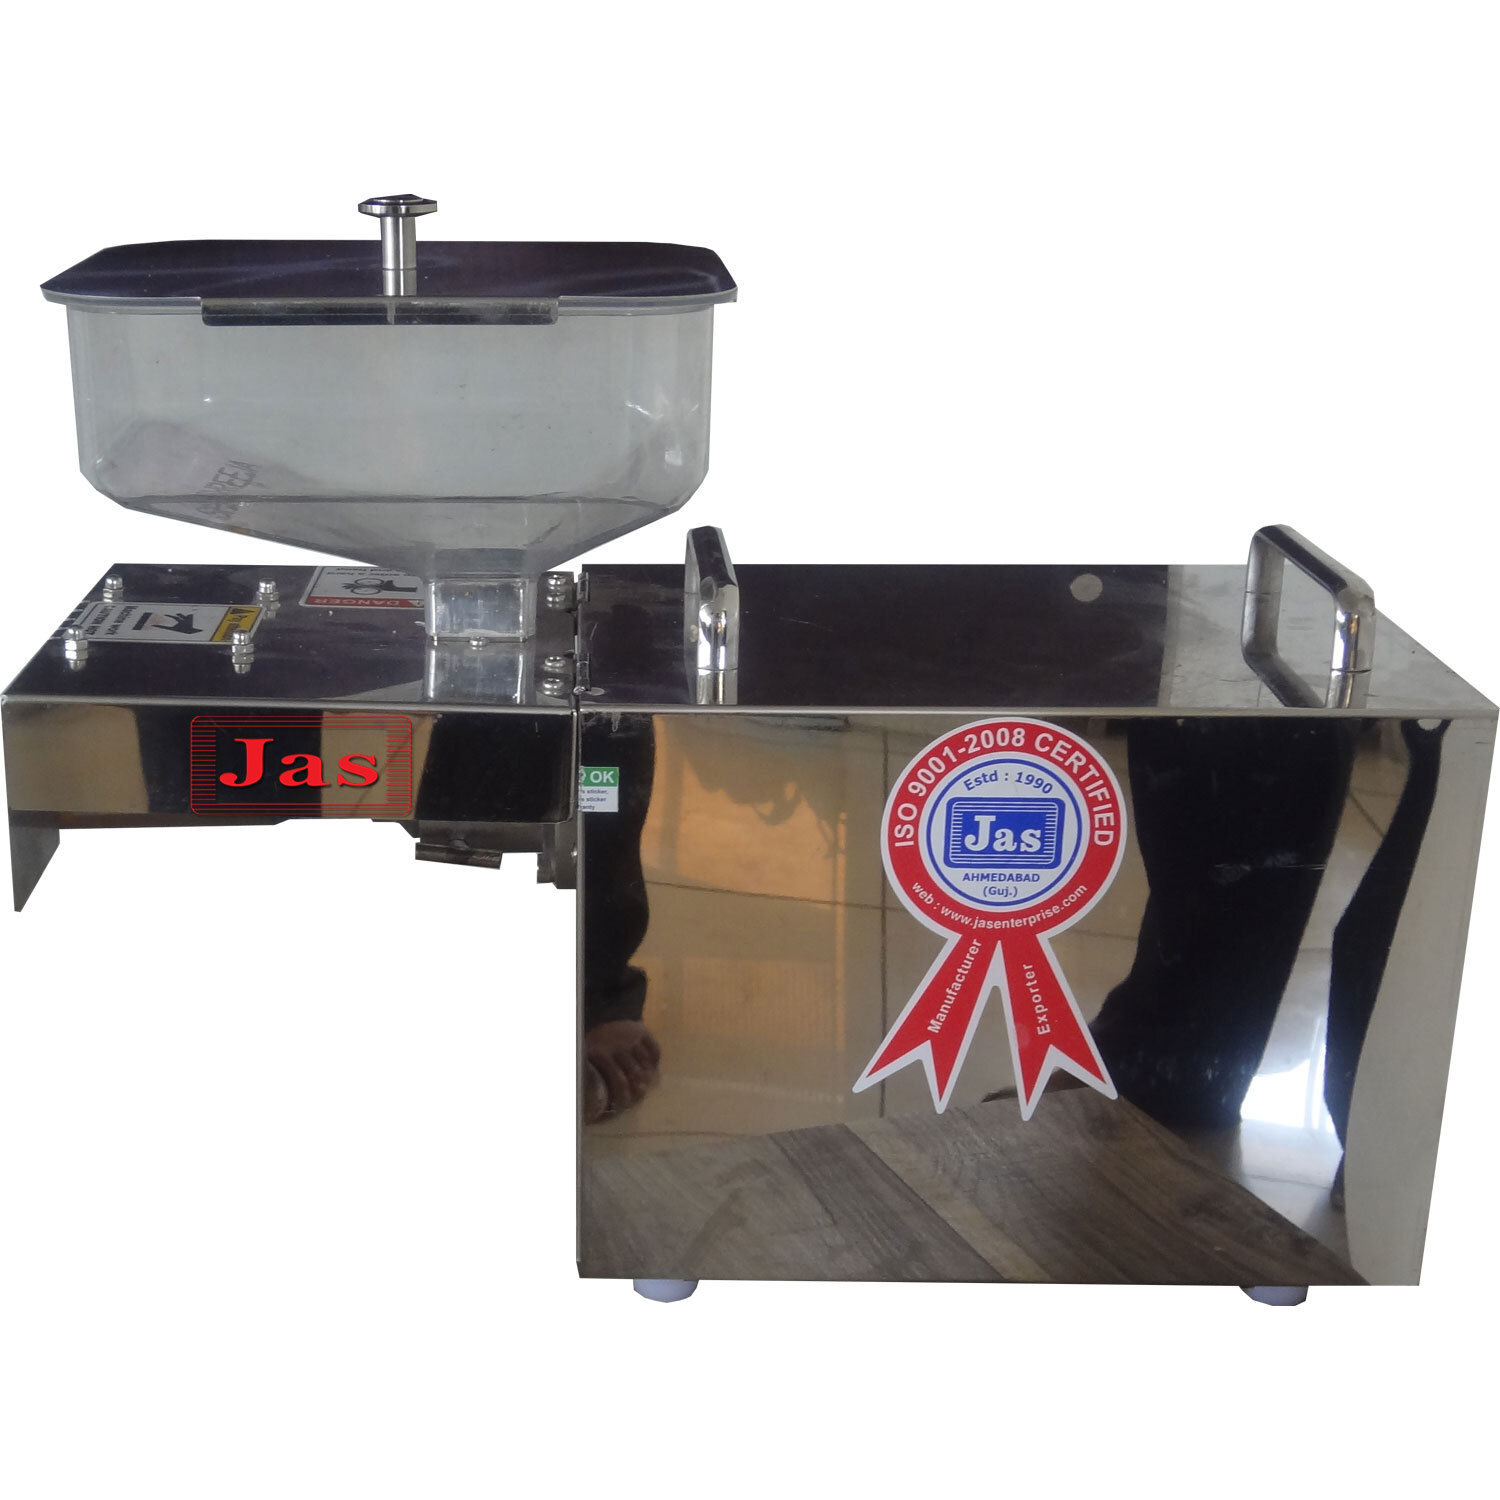 Flex Seed Oil Extraction Machine